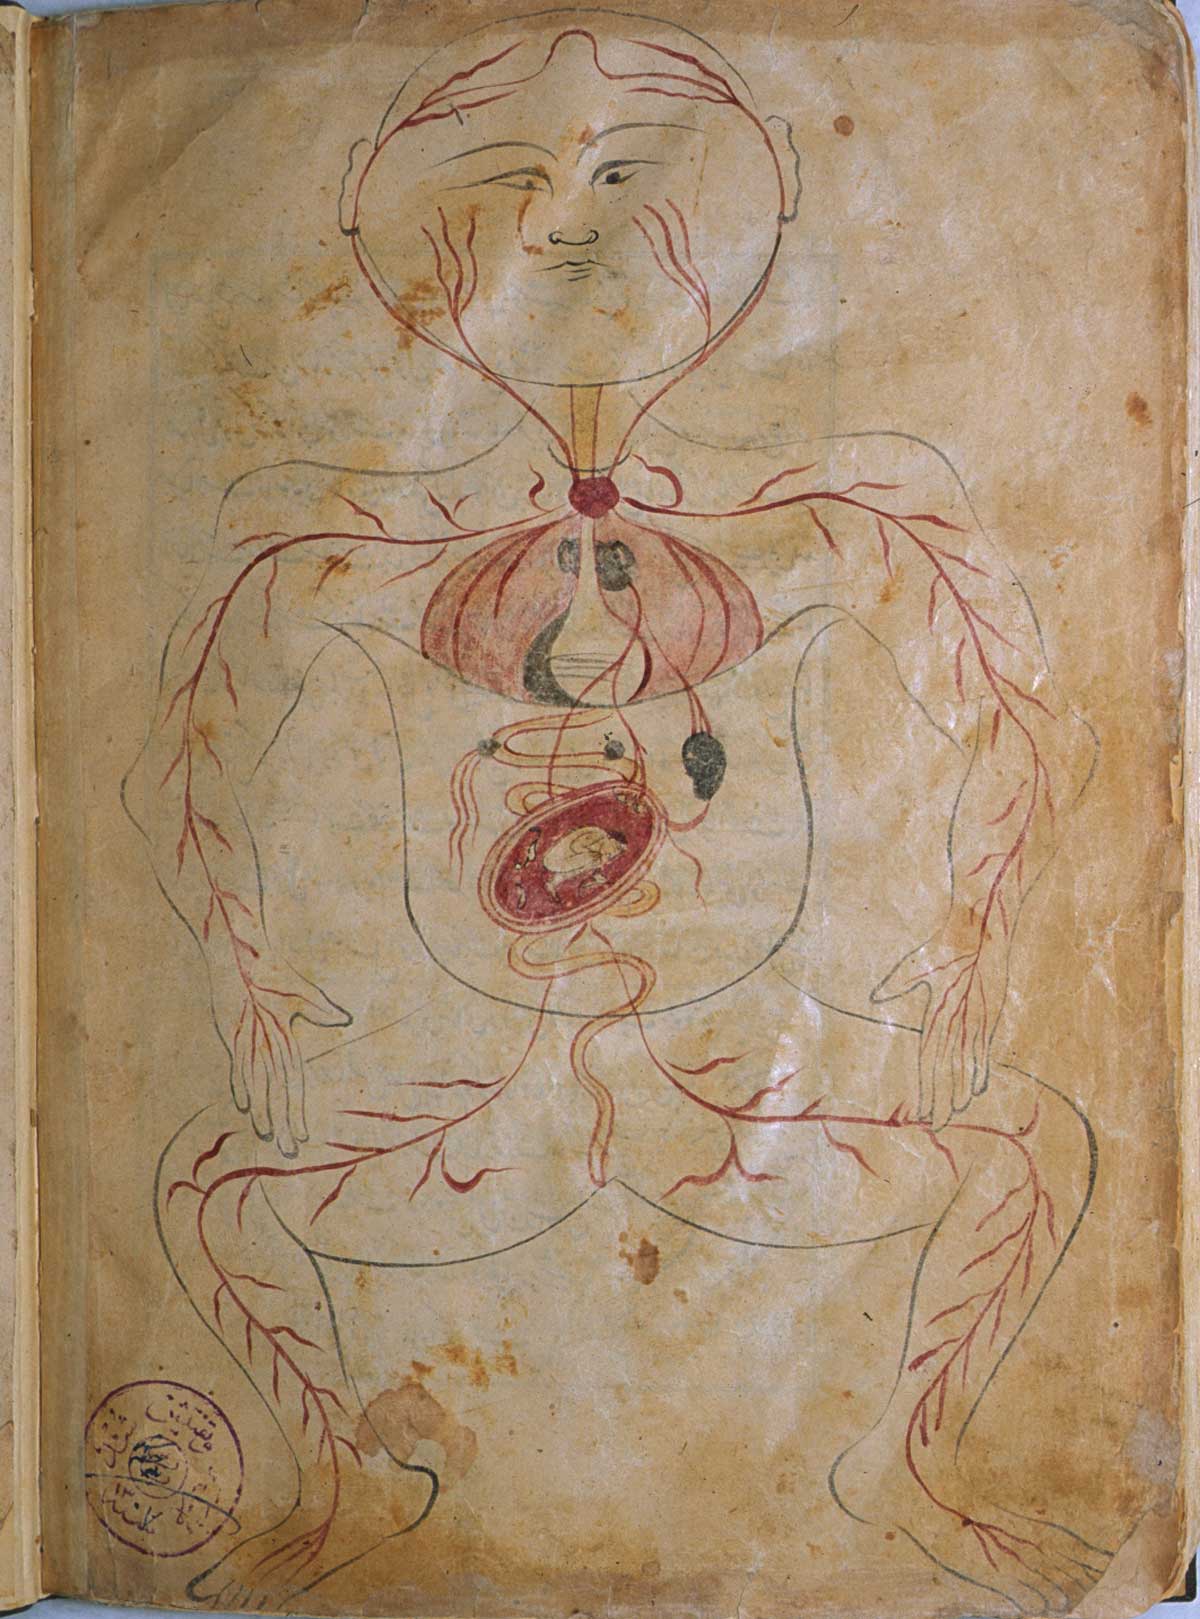 Folio 39b of Mansur ibn Ilyas' Tashrih-i badan-i insan, featuring the figure of a pregnant woman. This is essentially the arterial figure on which a gravid uterus with the foetus in a breech or transverse position has been superimposed.